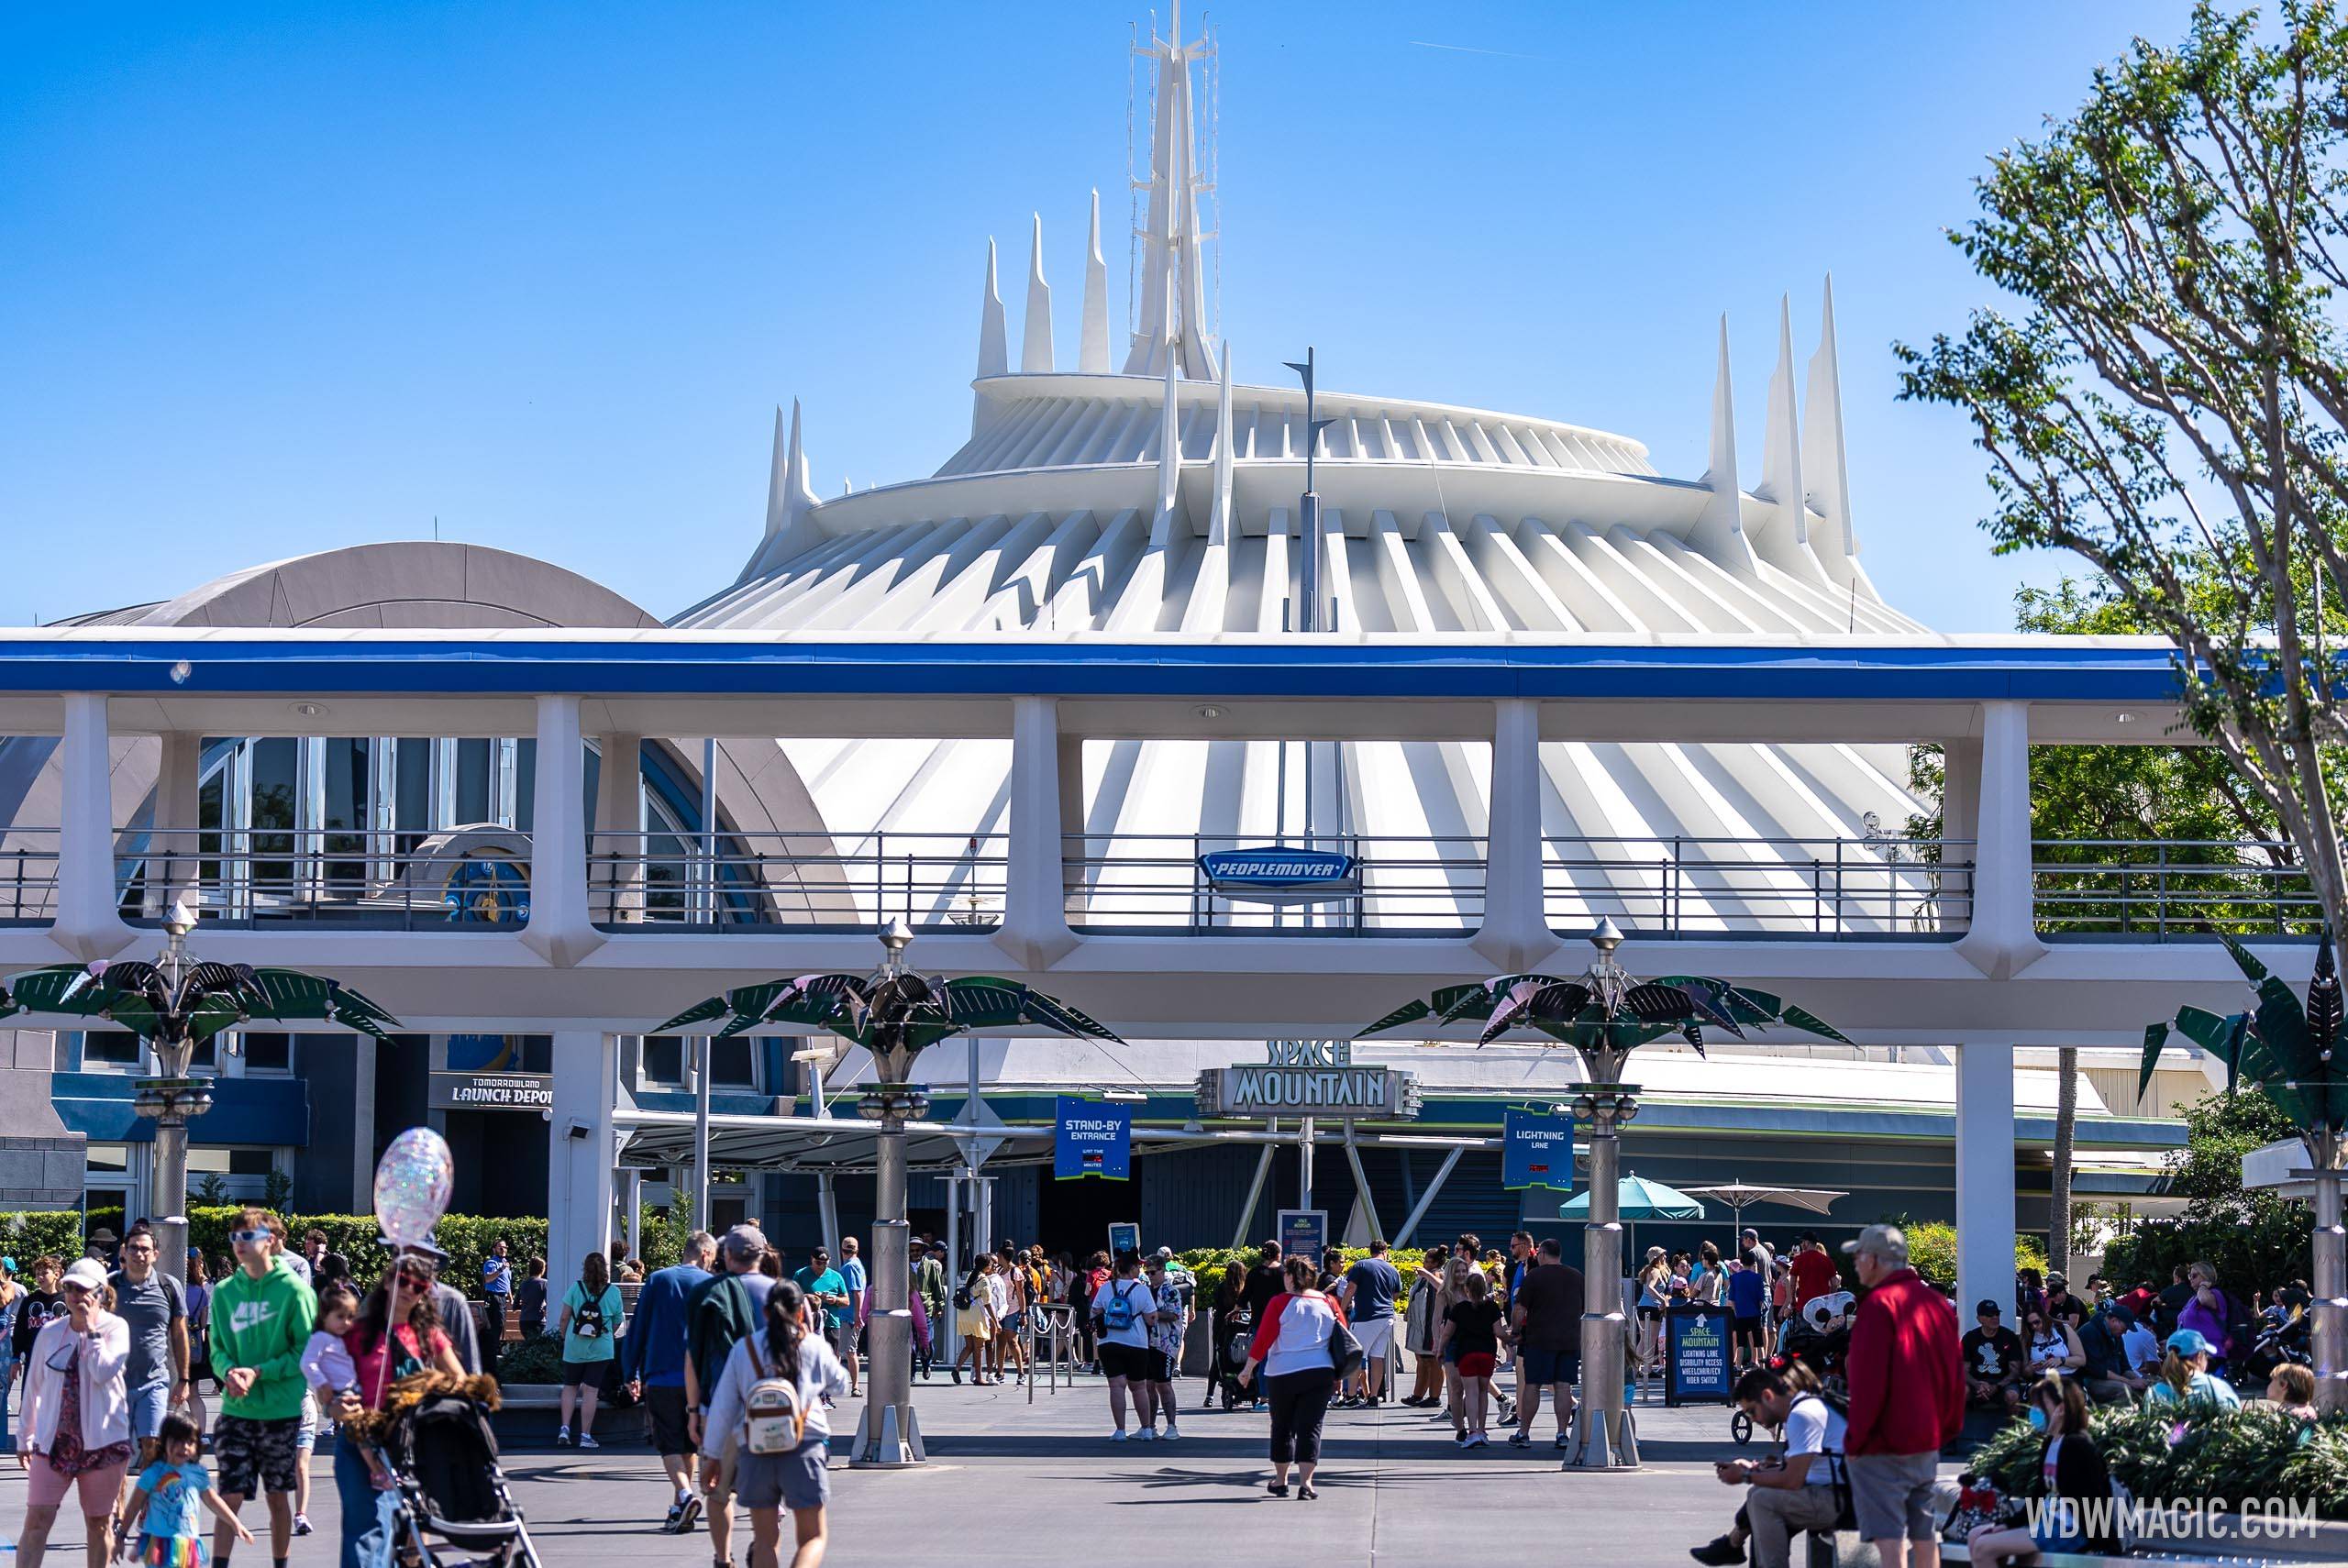 Space Mountain has a wait of 100 minutes today